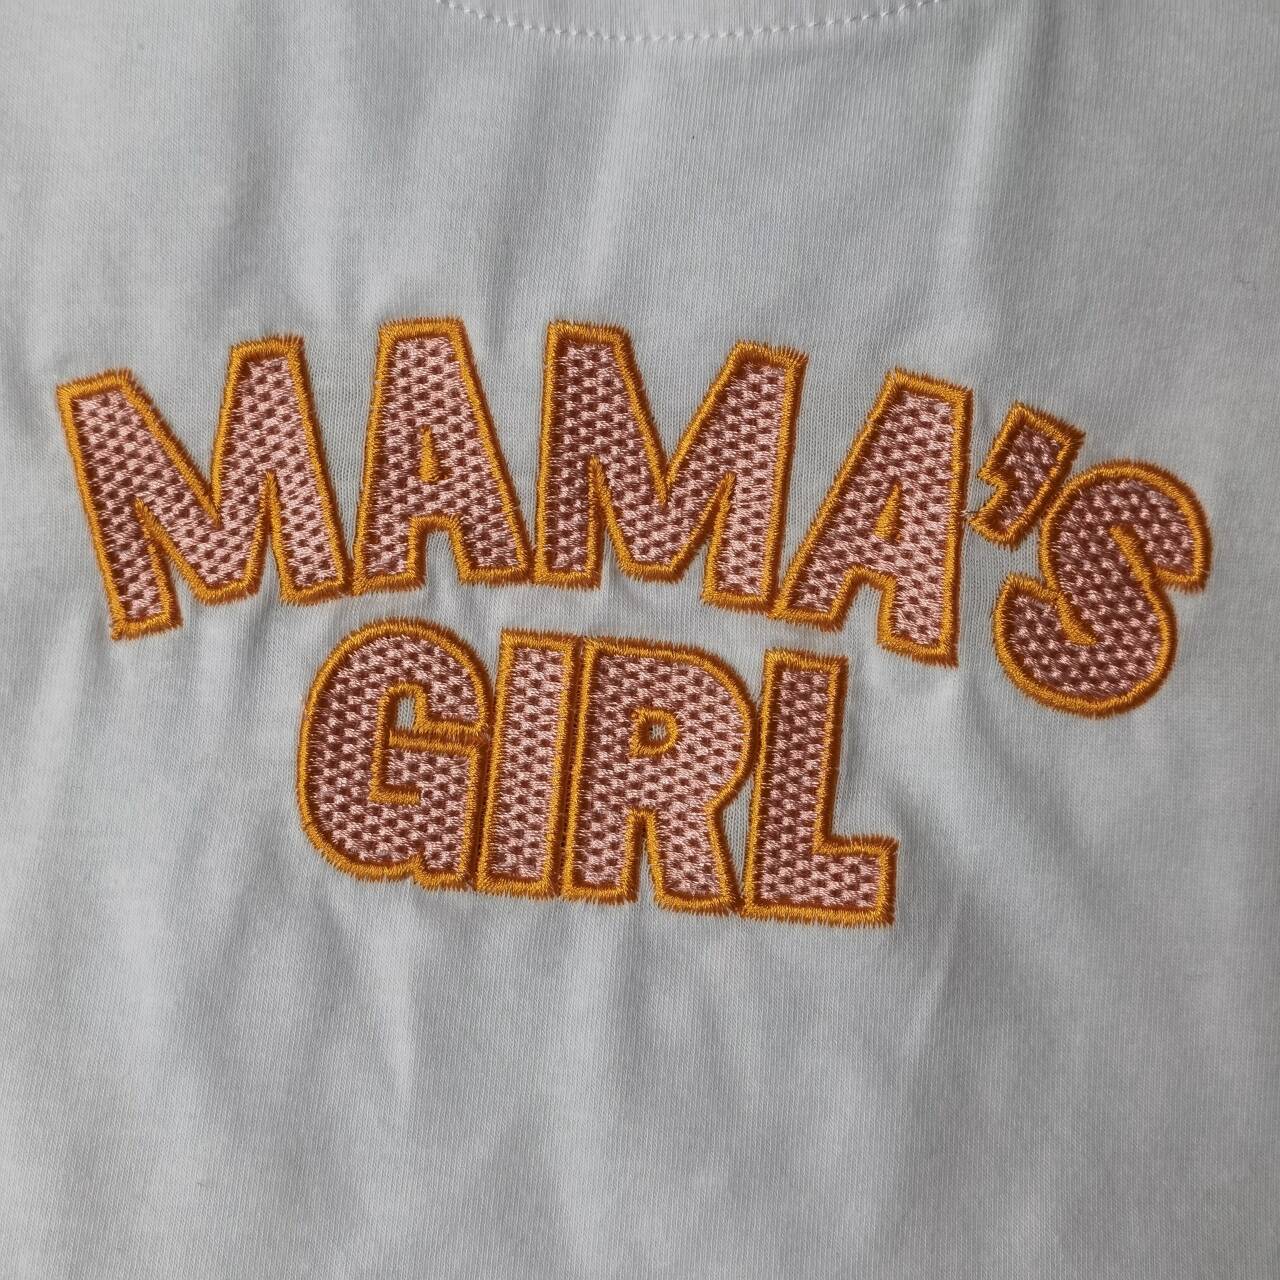 pink white cotton mama's girl outfit